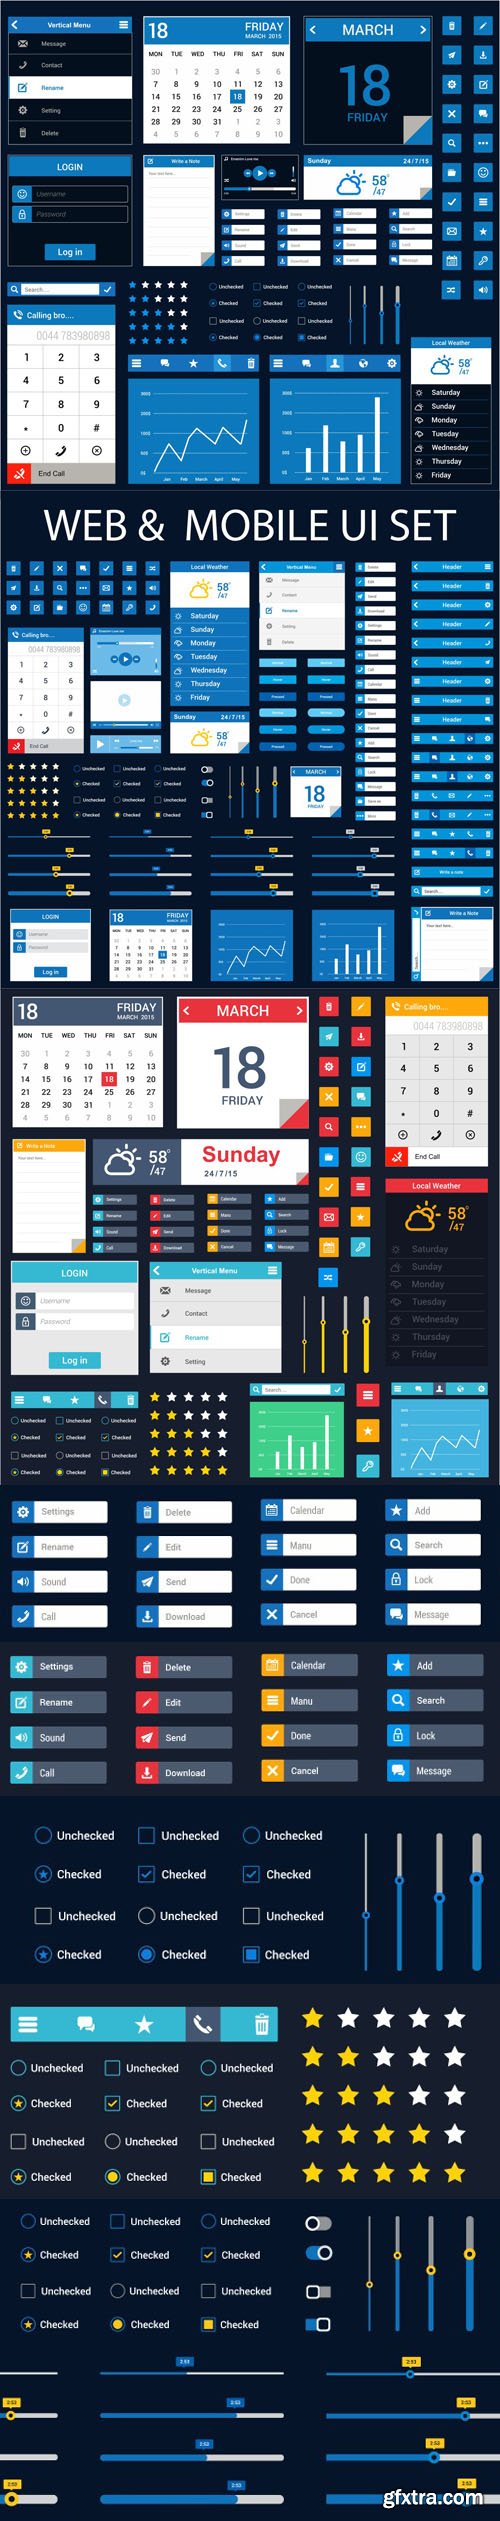 Web & Mobile UI KIT Vector Templates Collection